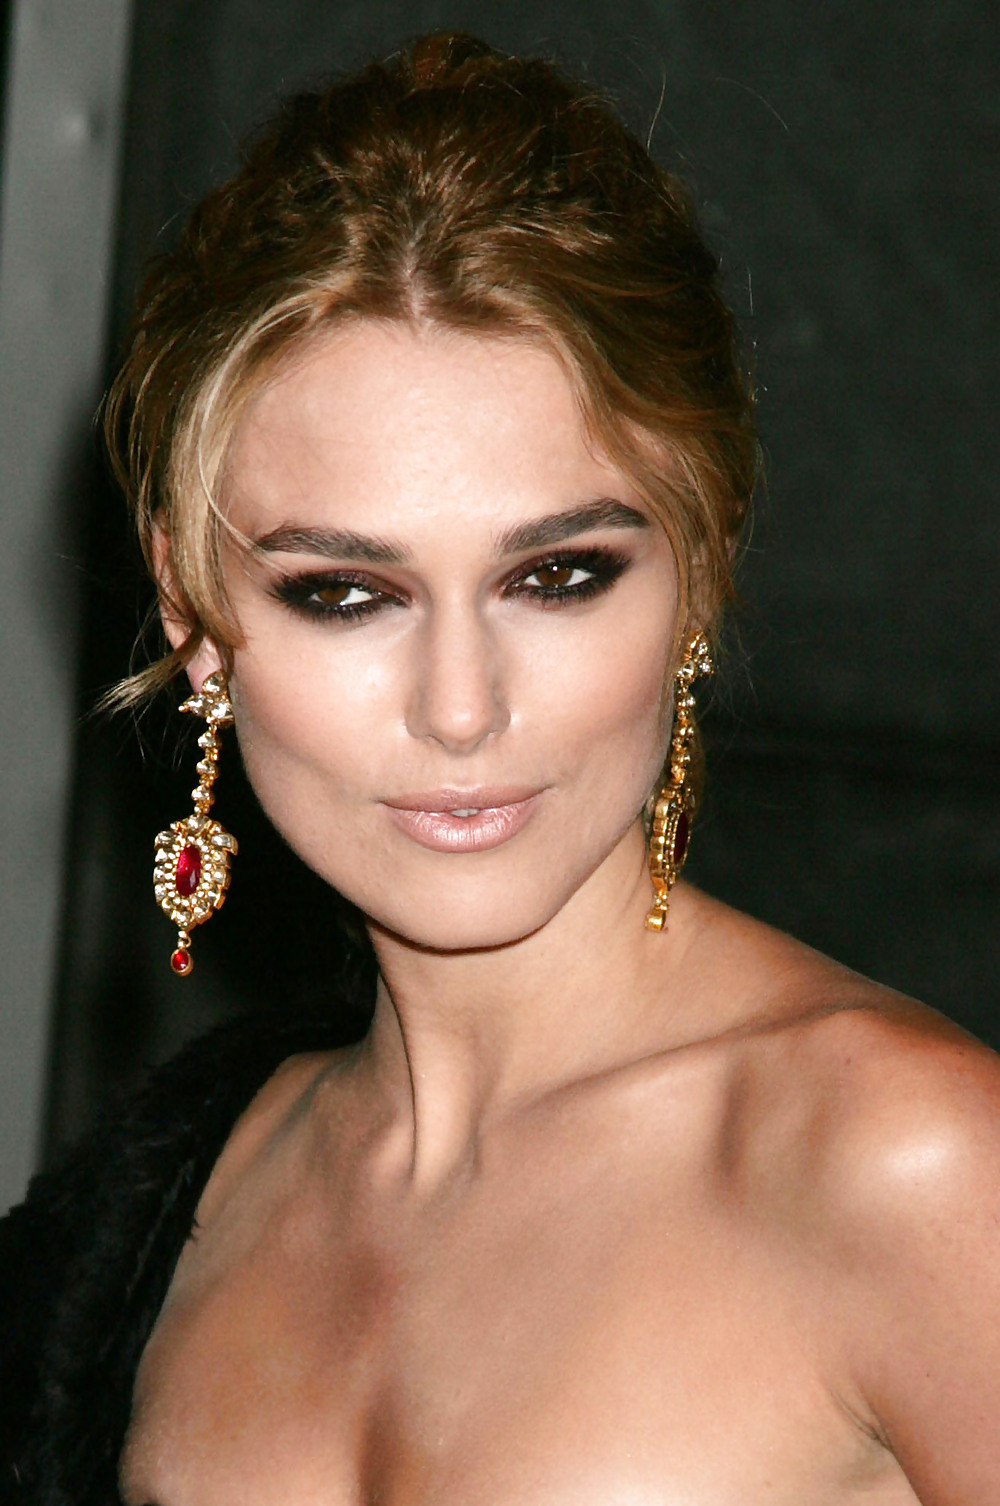 Keira Knightley The Royal Lady of England #35650440